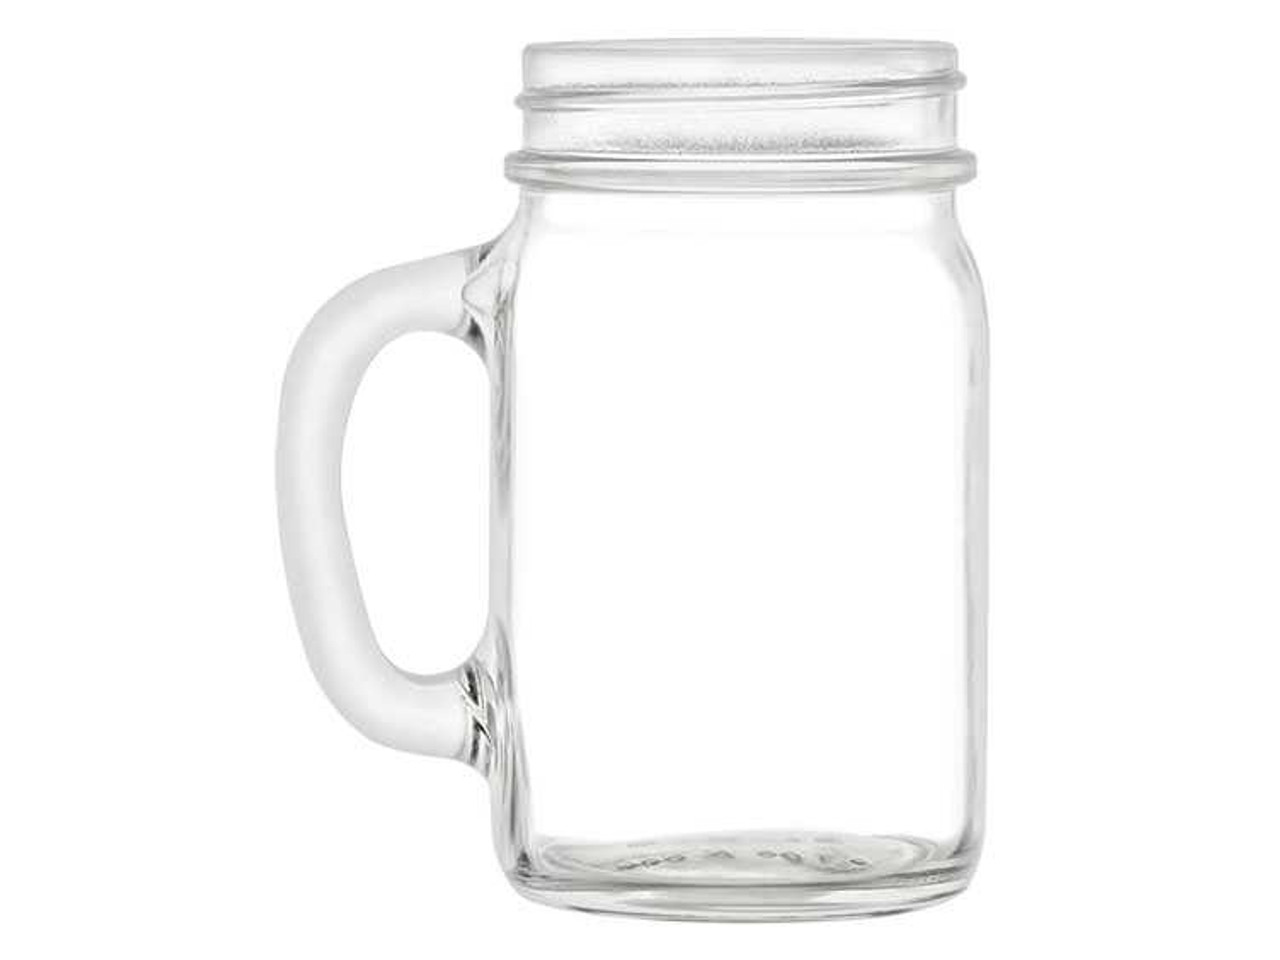 Tosnail 6 Pack 16 oz Glass Mason Jar Mugs with Handle, 12 Tin Lids and 6  Plastic Straws, Old Fashion…See more Tosnail 6 Pack 16 oz Glass Mason Jar